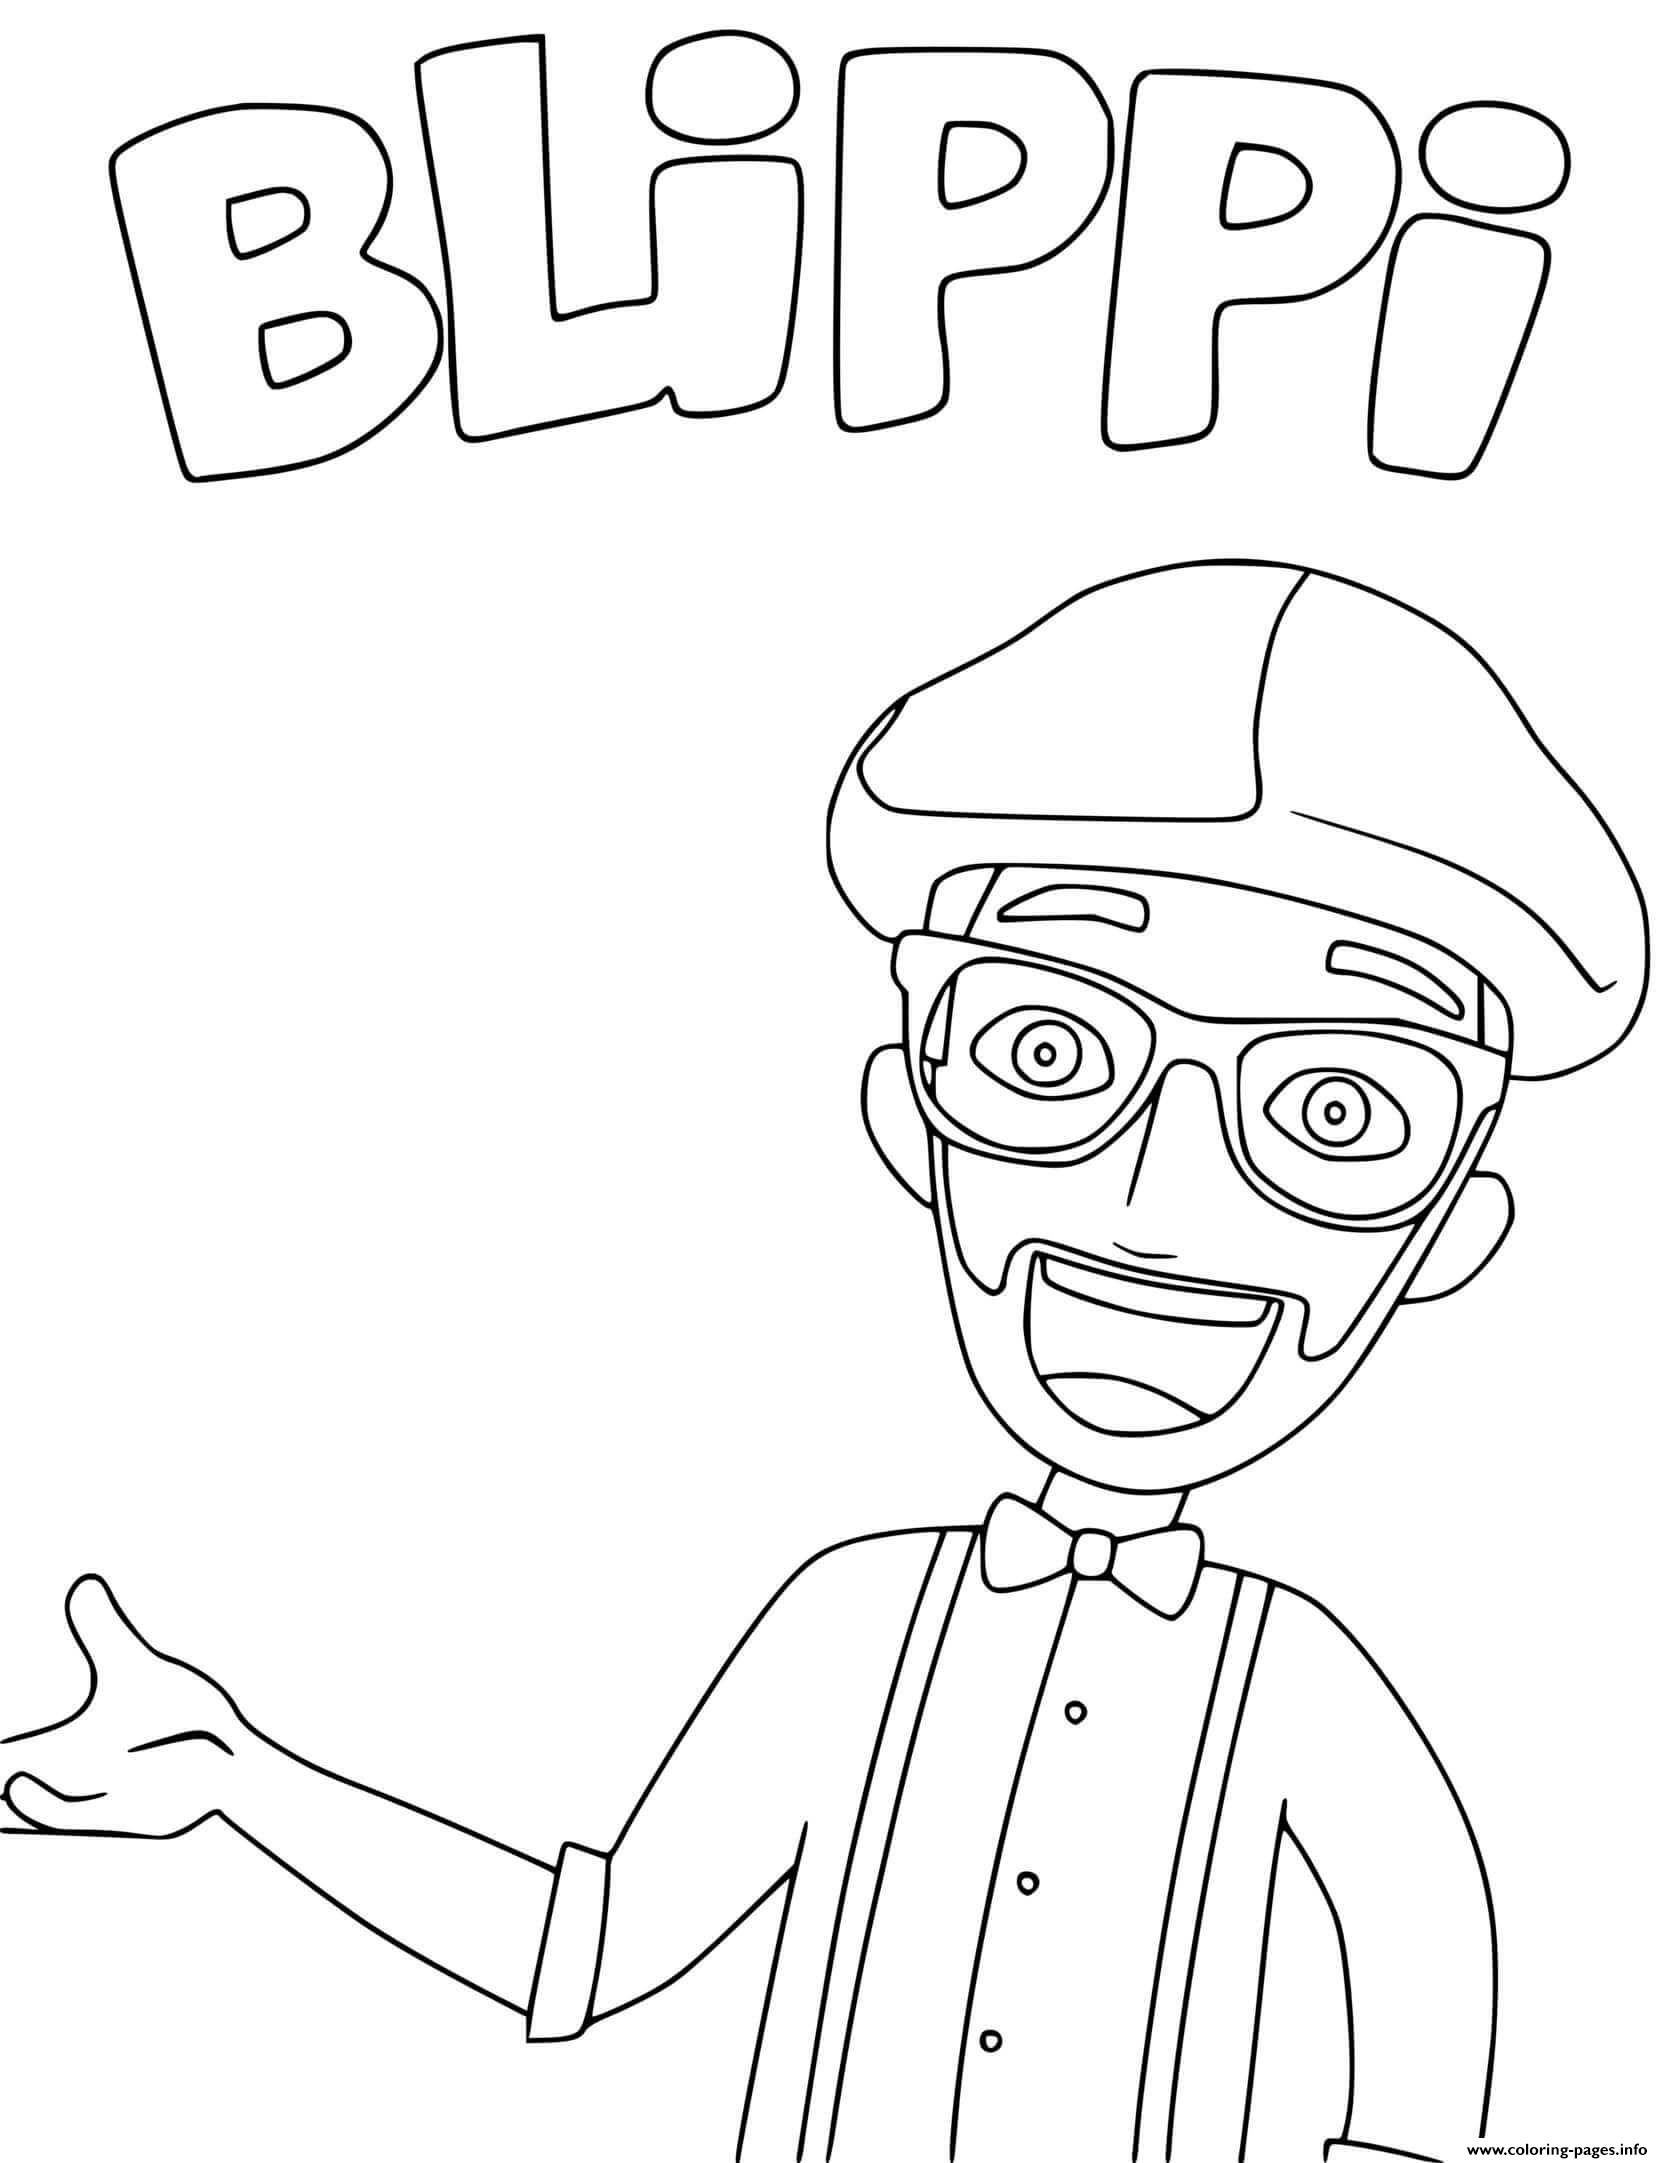 Print blippi educational coloring pages birthday coloring pages coloring pages dinosaur coloring pages